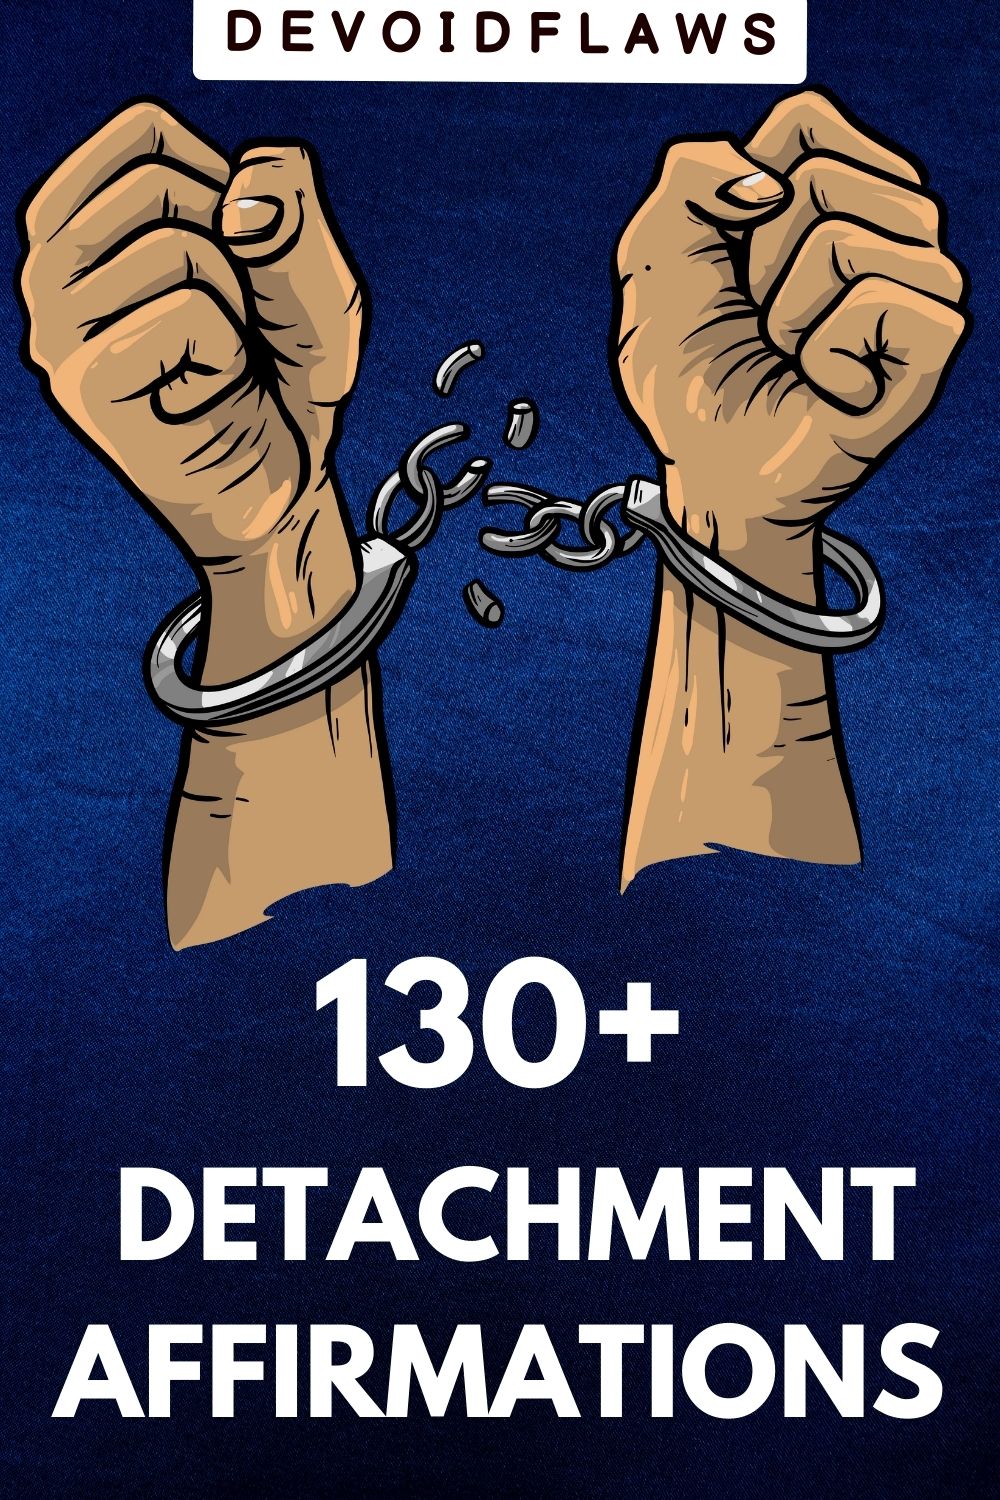 blue background image with text "130+ detachment affirmations"